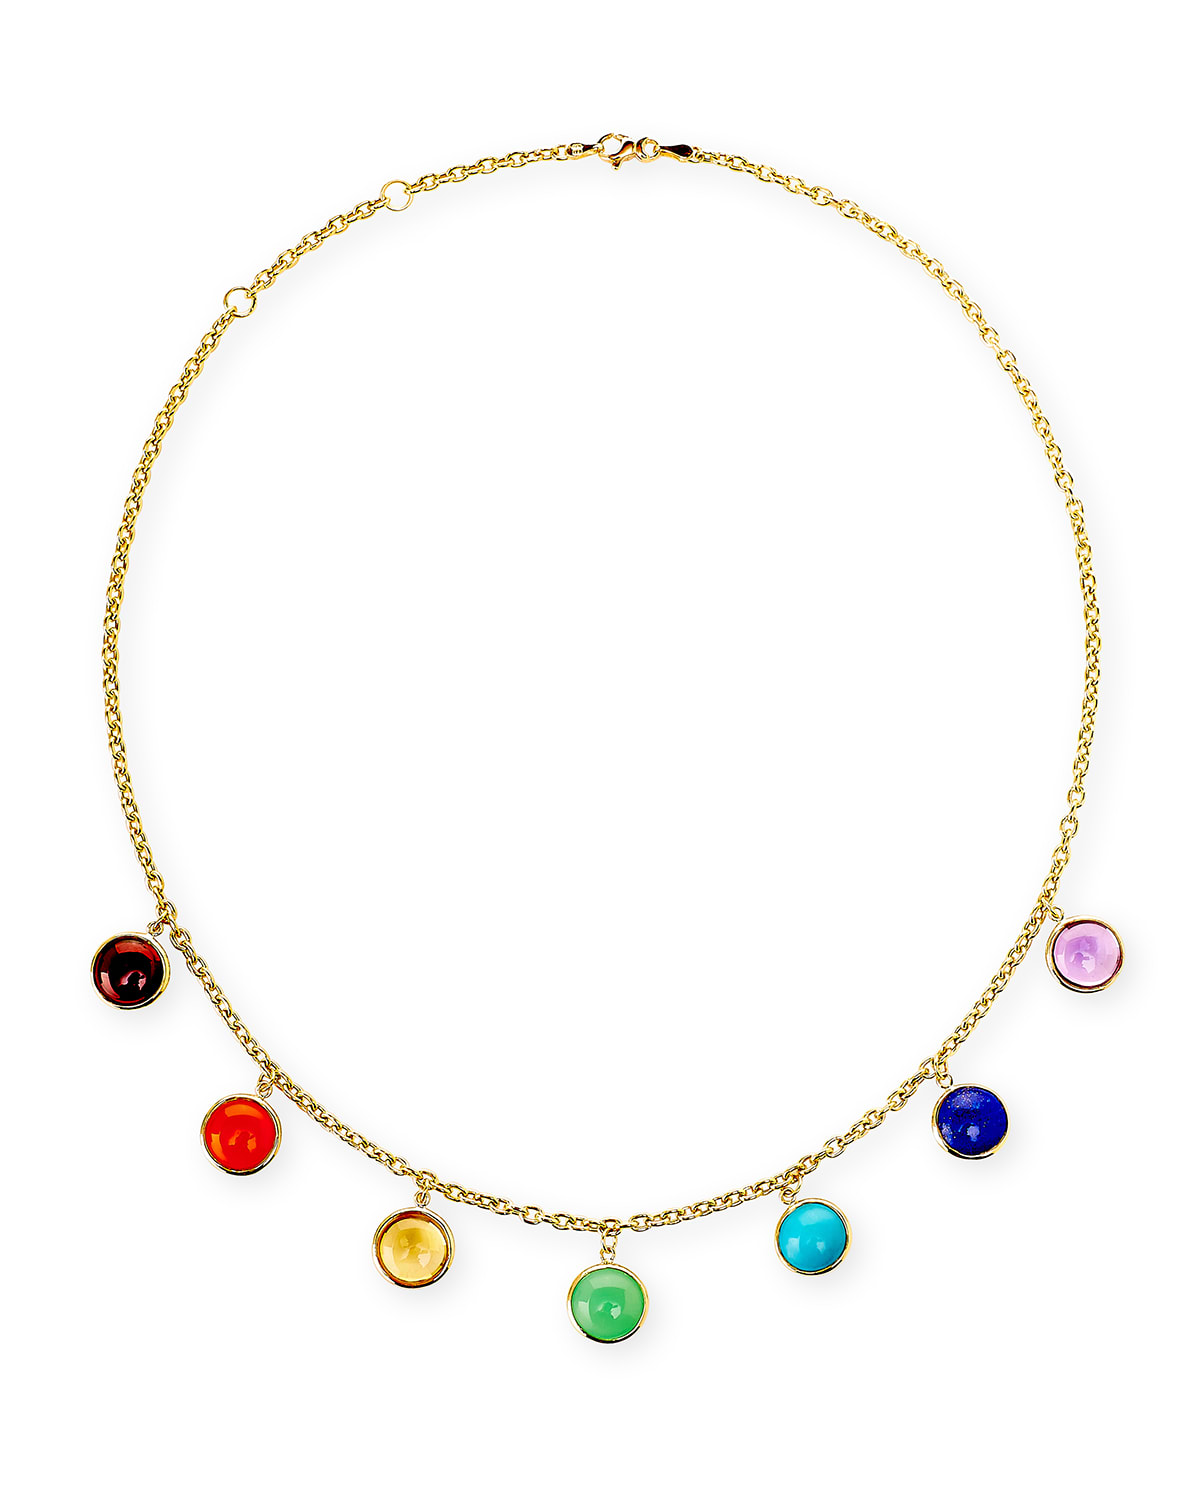 Syna 18k Seven Chakra Charm Necklace With 10mm Discs